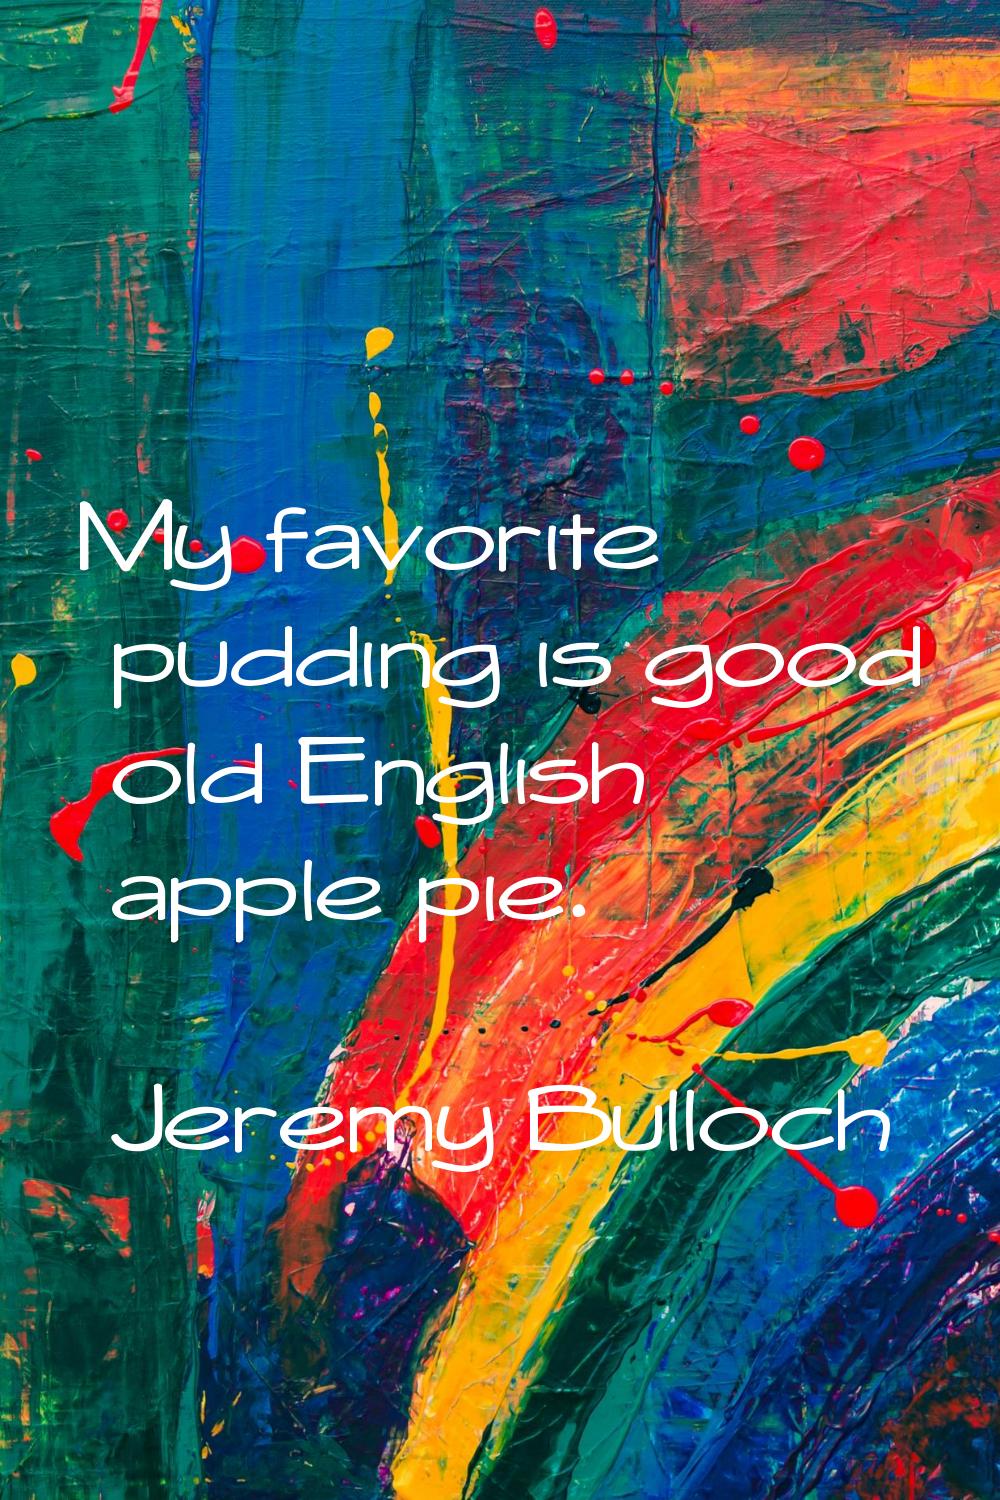 My favorite pudding is good old English apple pie.